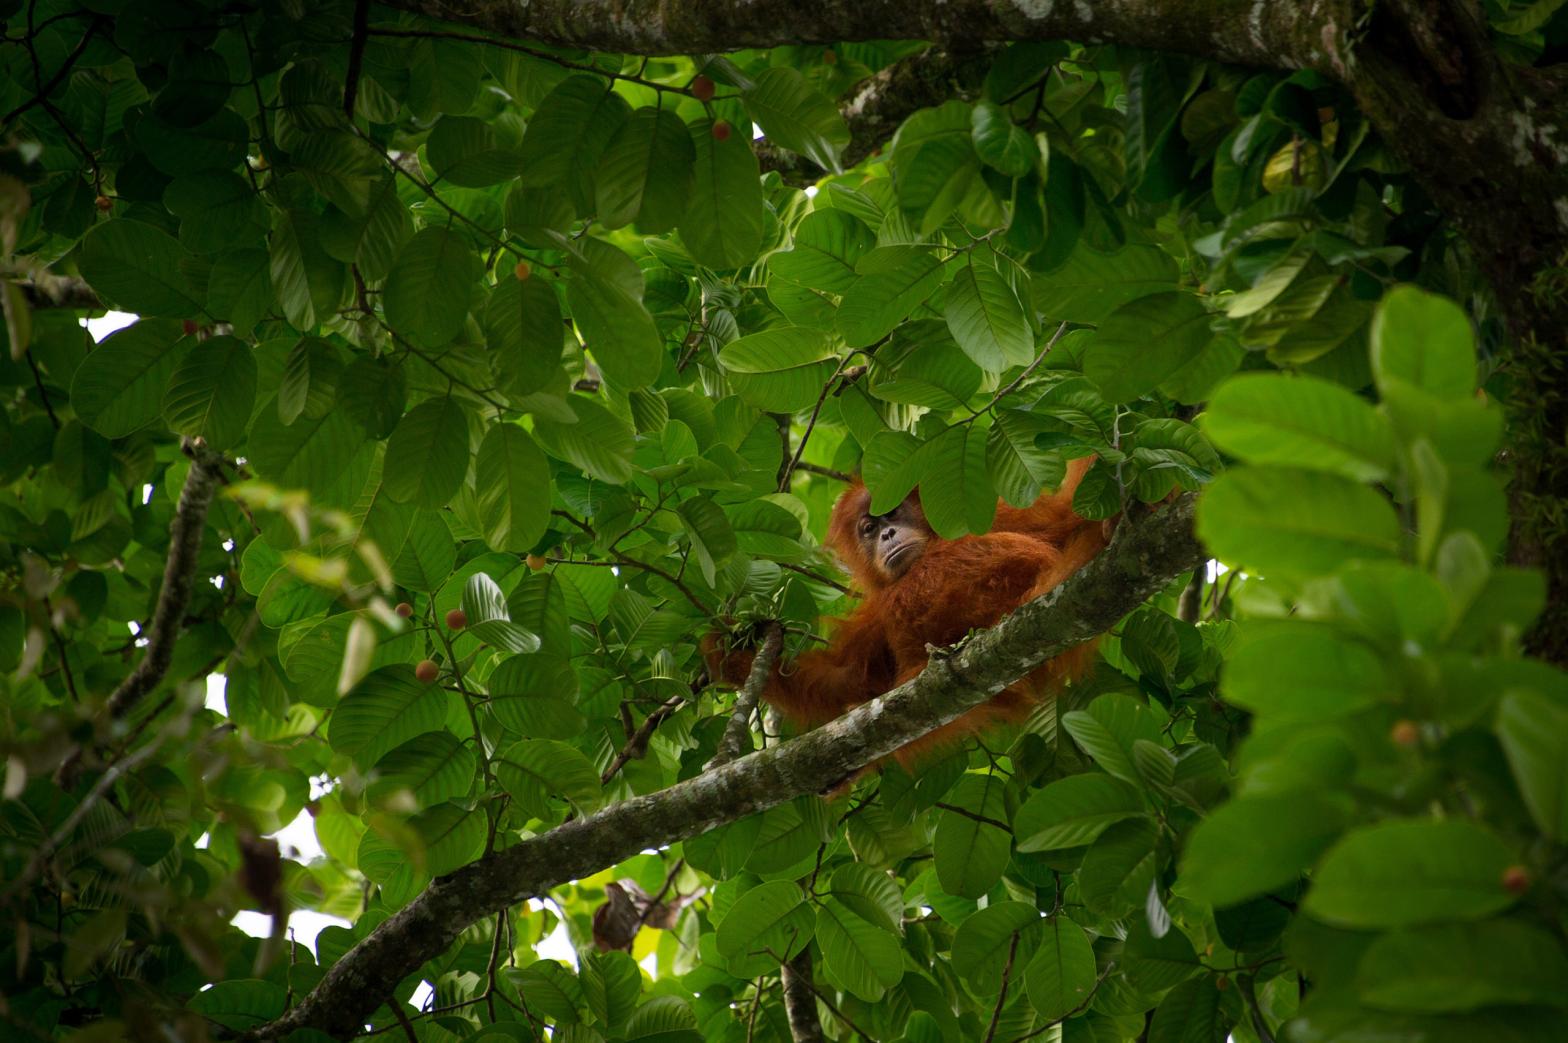 An orangutan in Indonesia, one of the research team's described biodiversity hotspots. (Photo: CHAIDEER MAHYUDDIN/AFP via Getty Images, Getty Images)